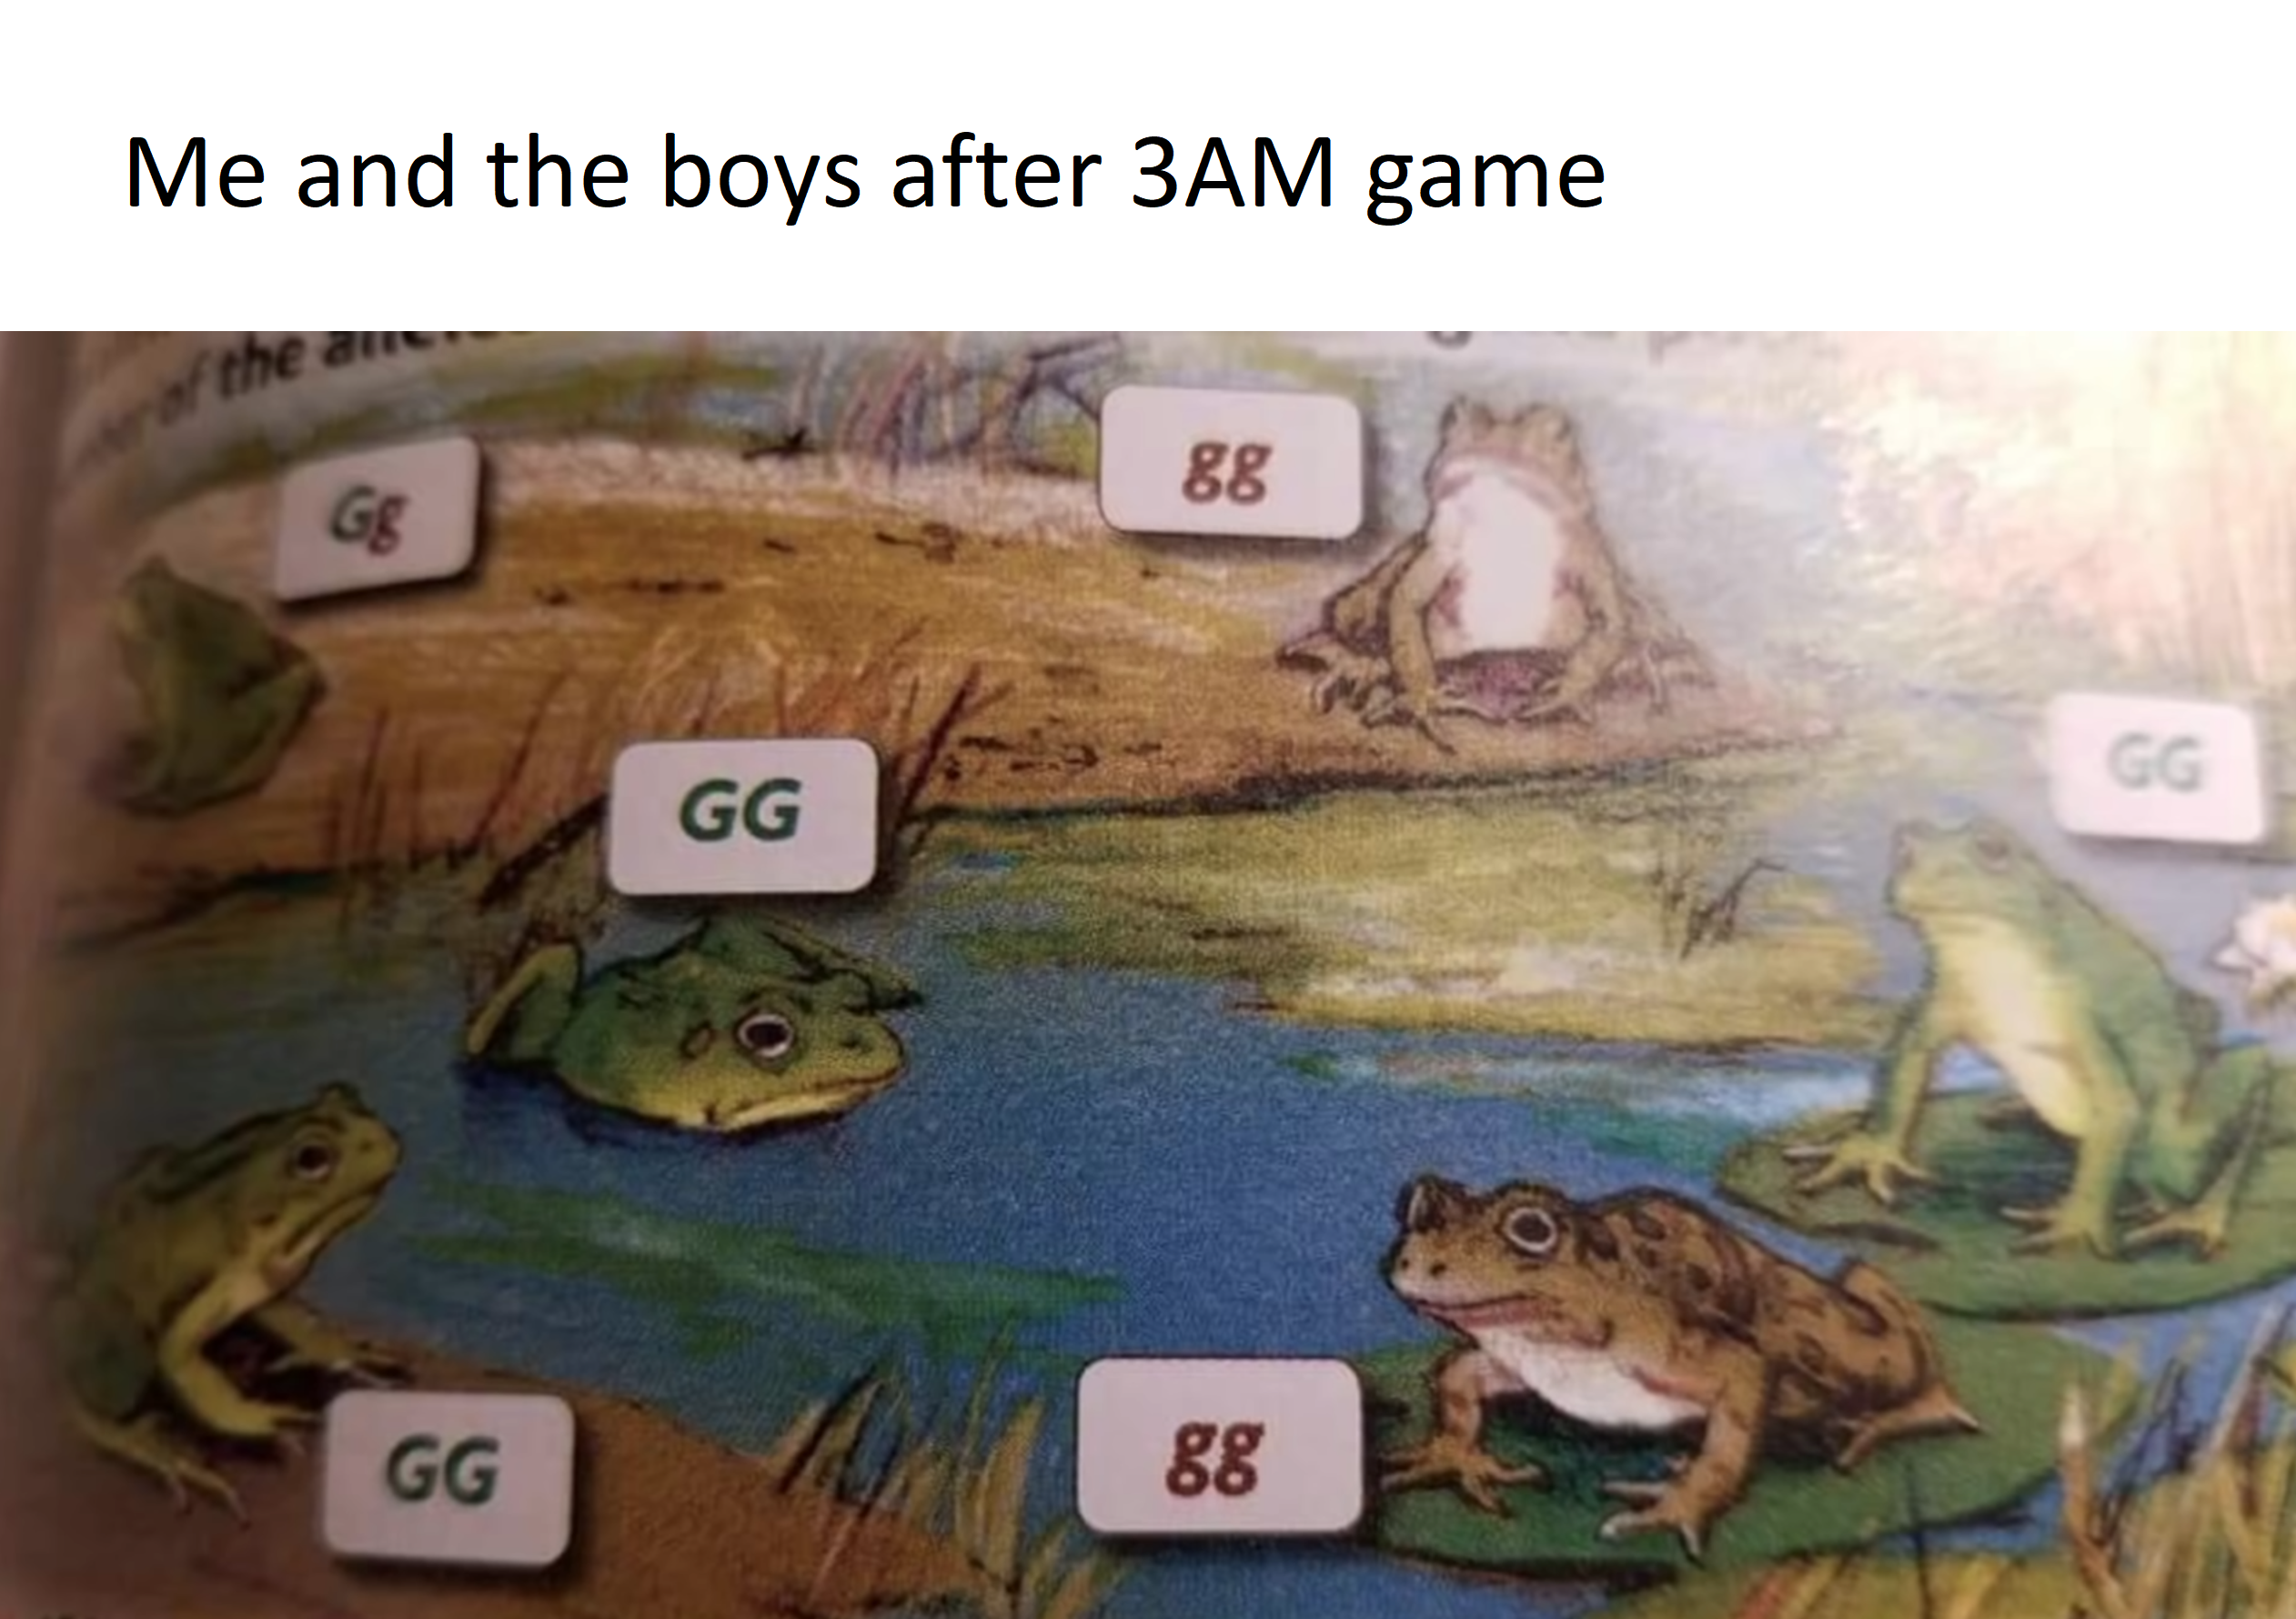 science diagrams that look like - Me and the boys after 3AM game 88 G Cg Gg Gg 88